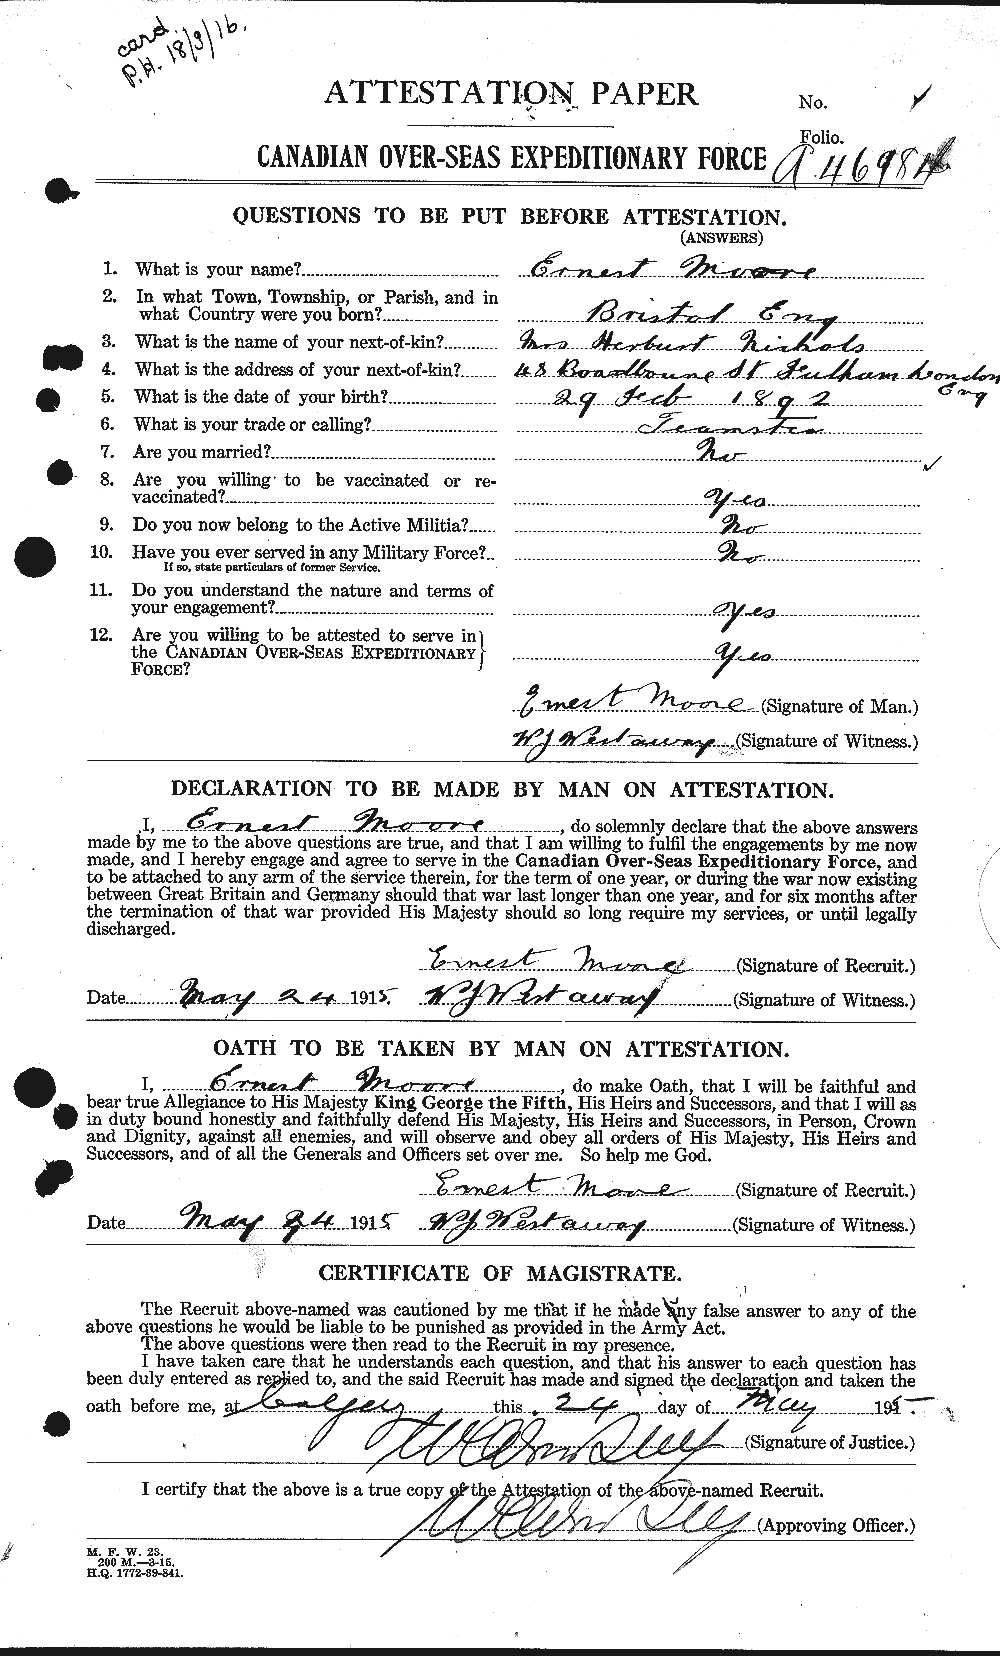 Personnel Records of the First World War - CEF 506656a